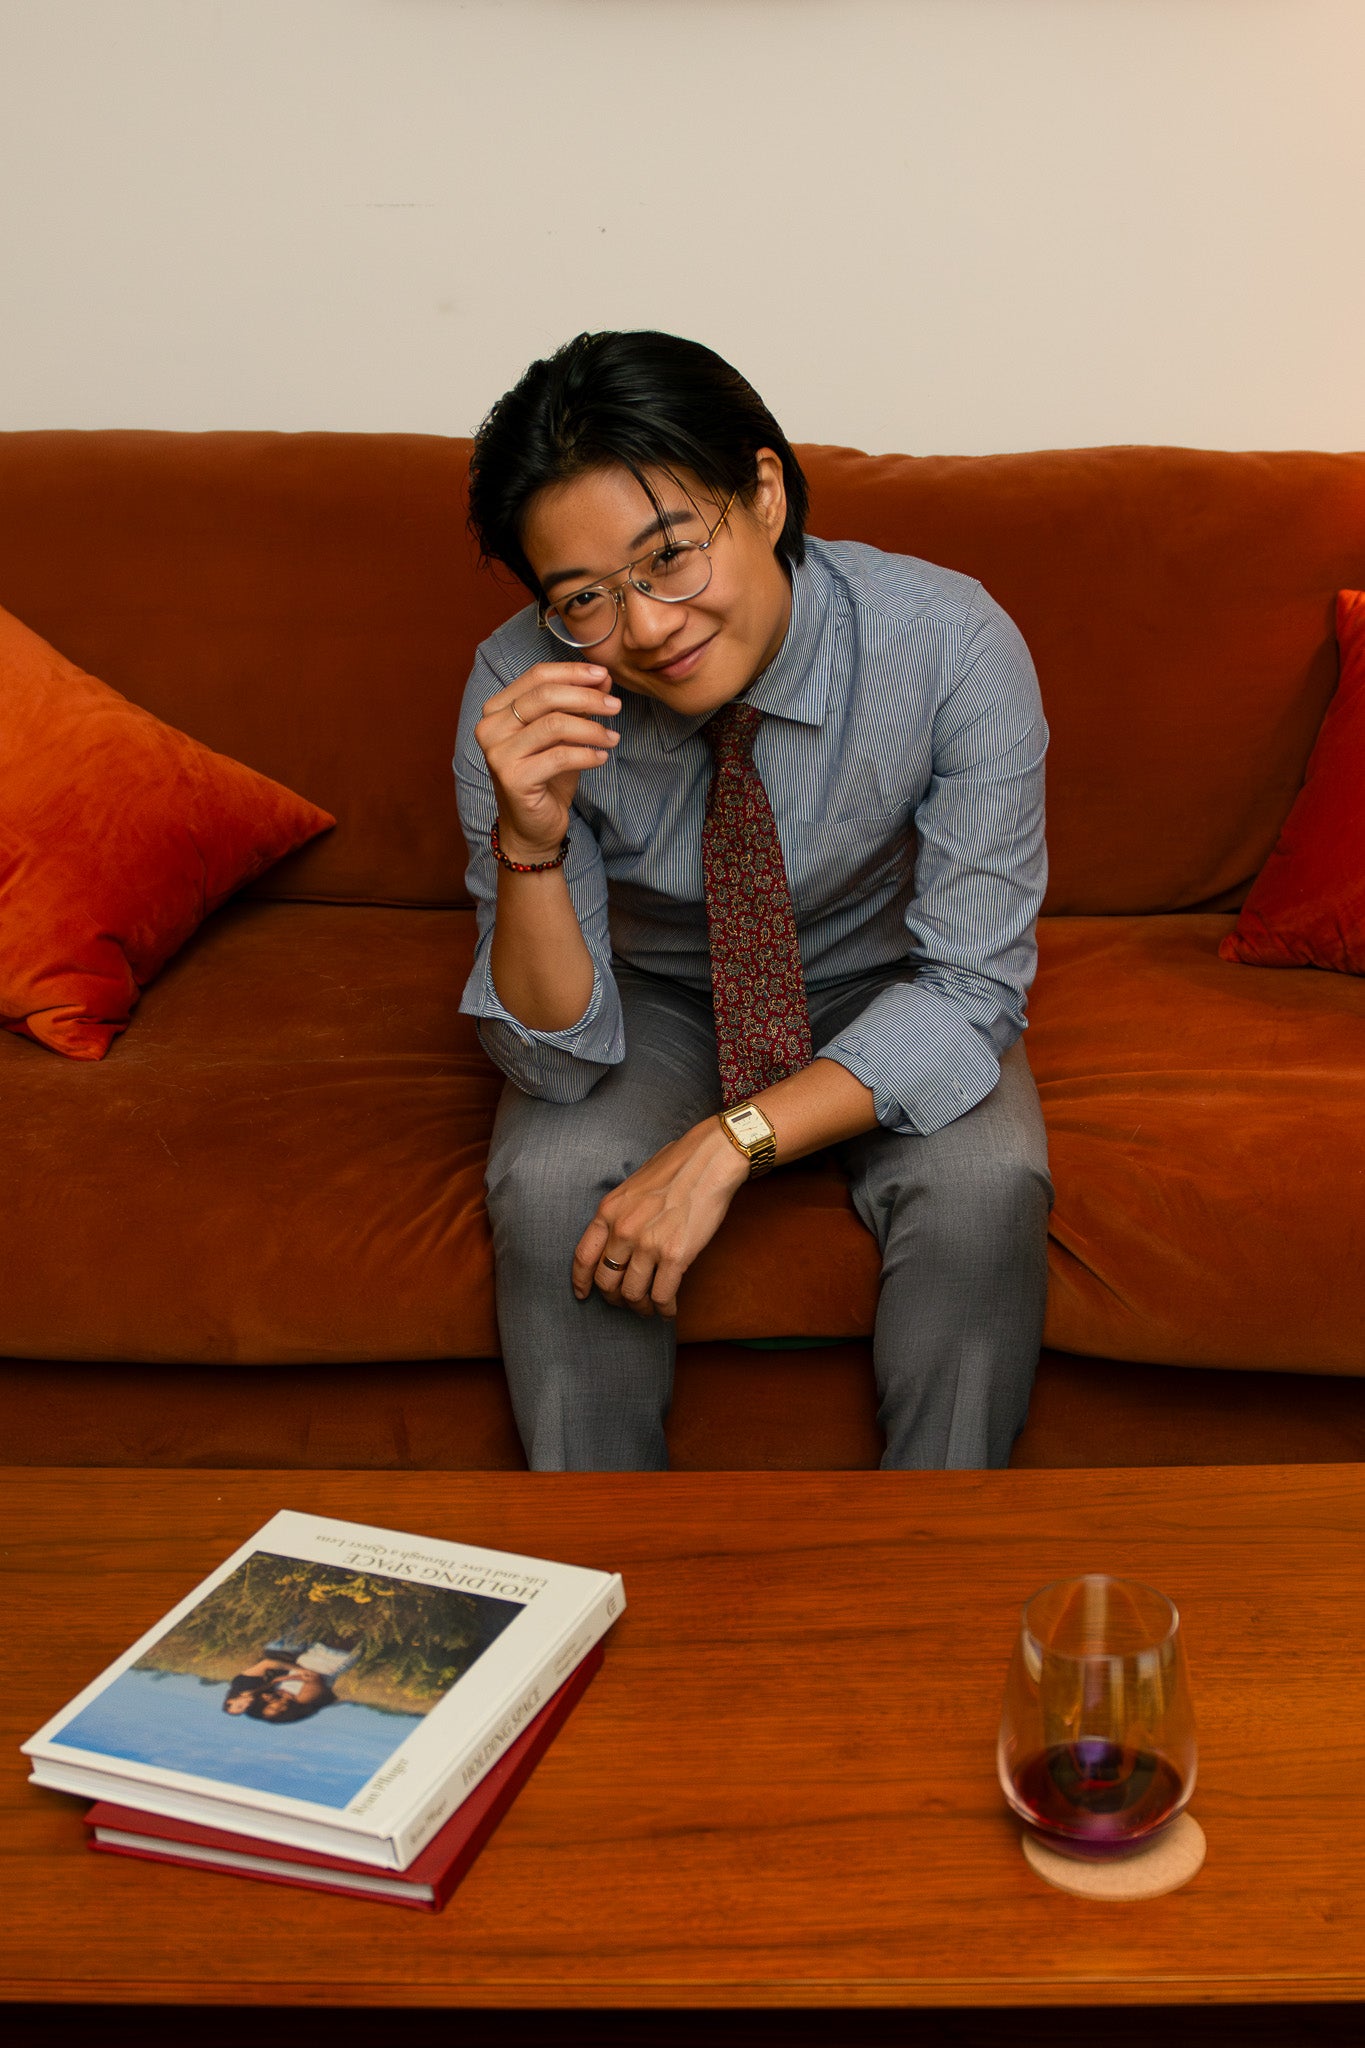 Airin Yung, a transmasculine lawyer sits on an orange velvet couch looking towards the camera with a smile